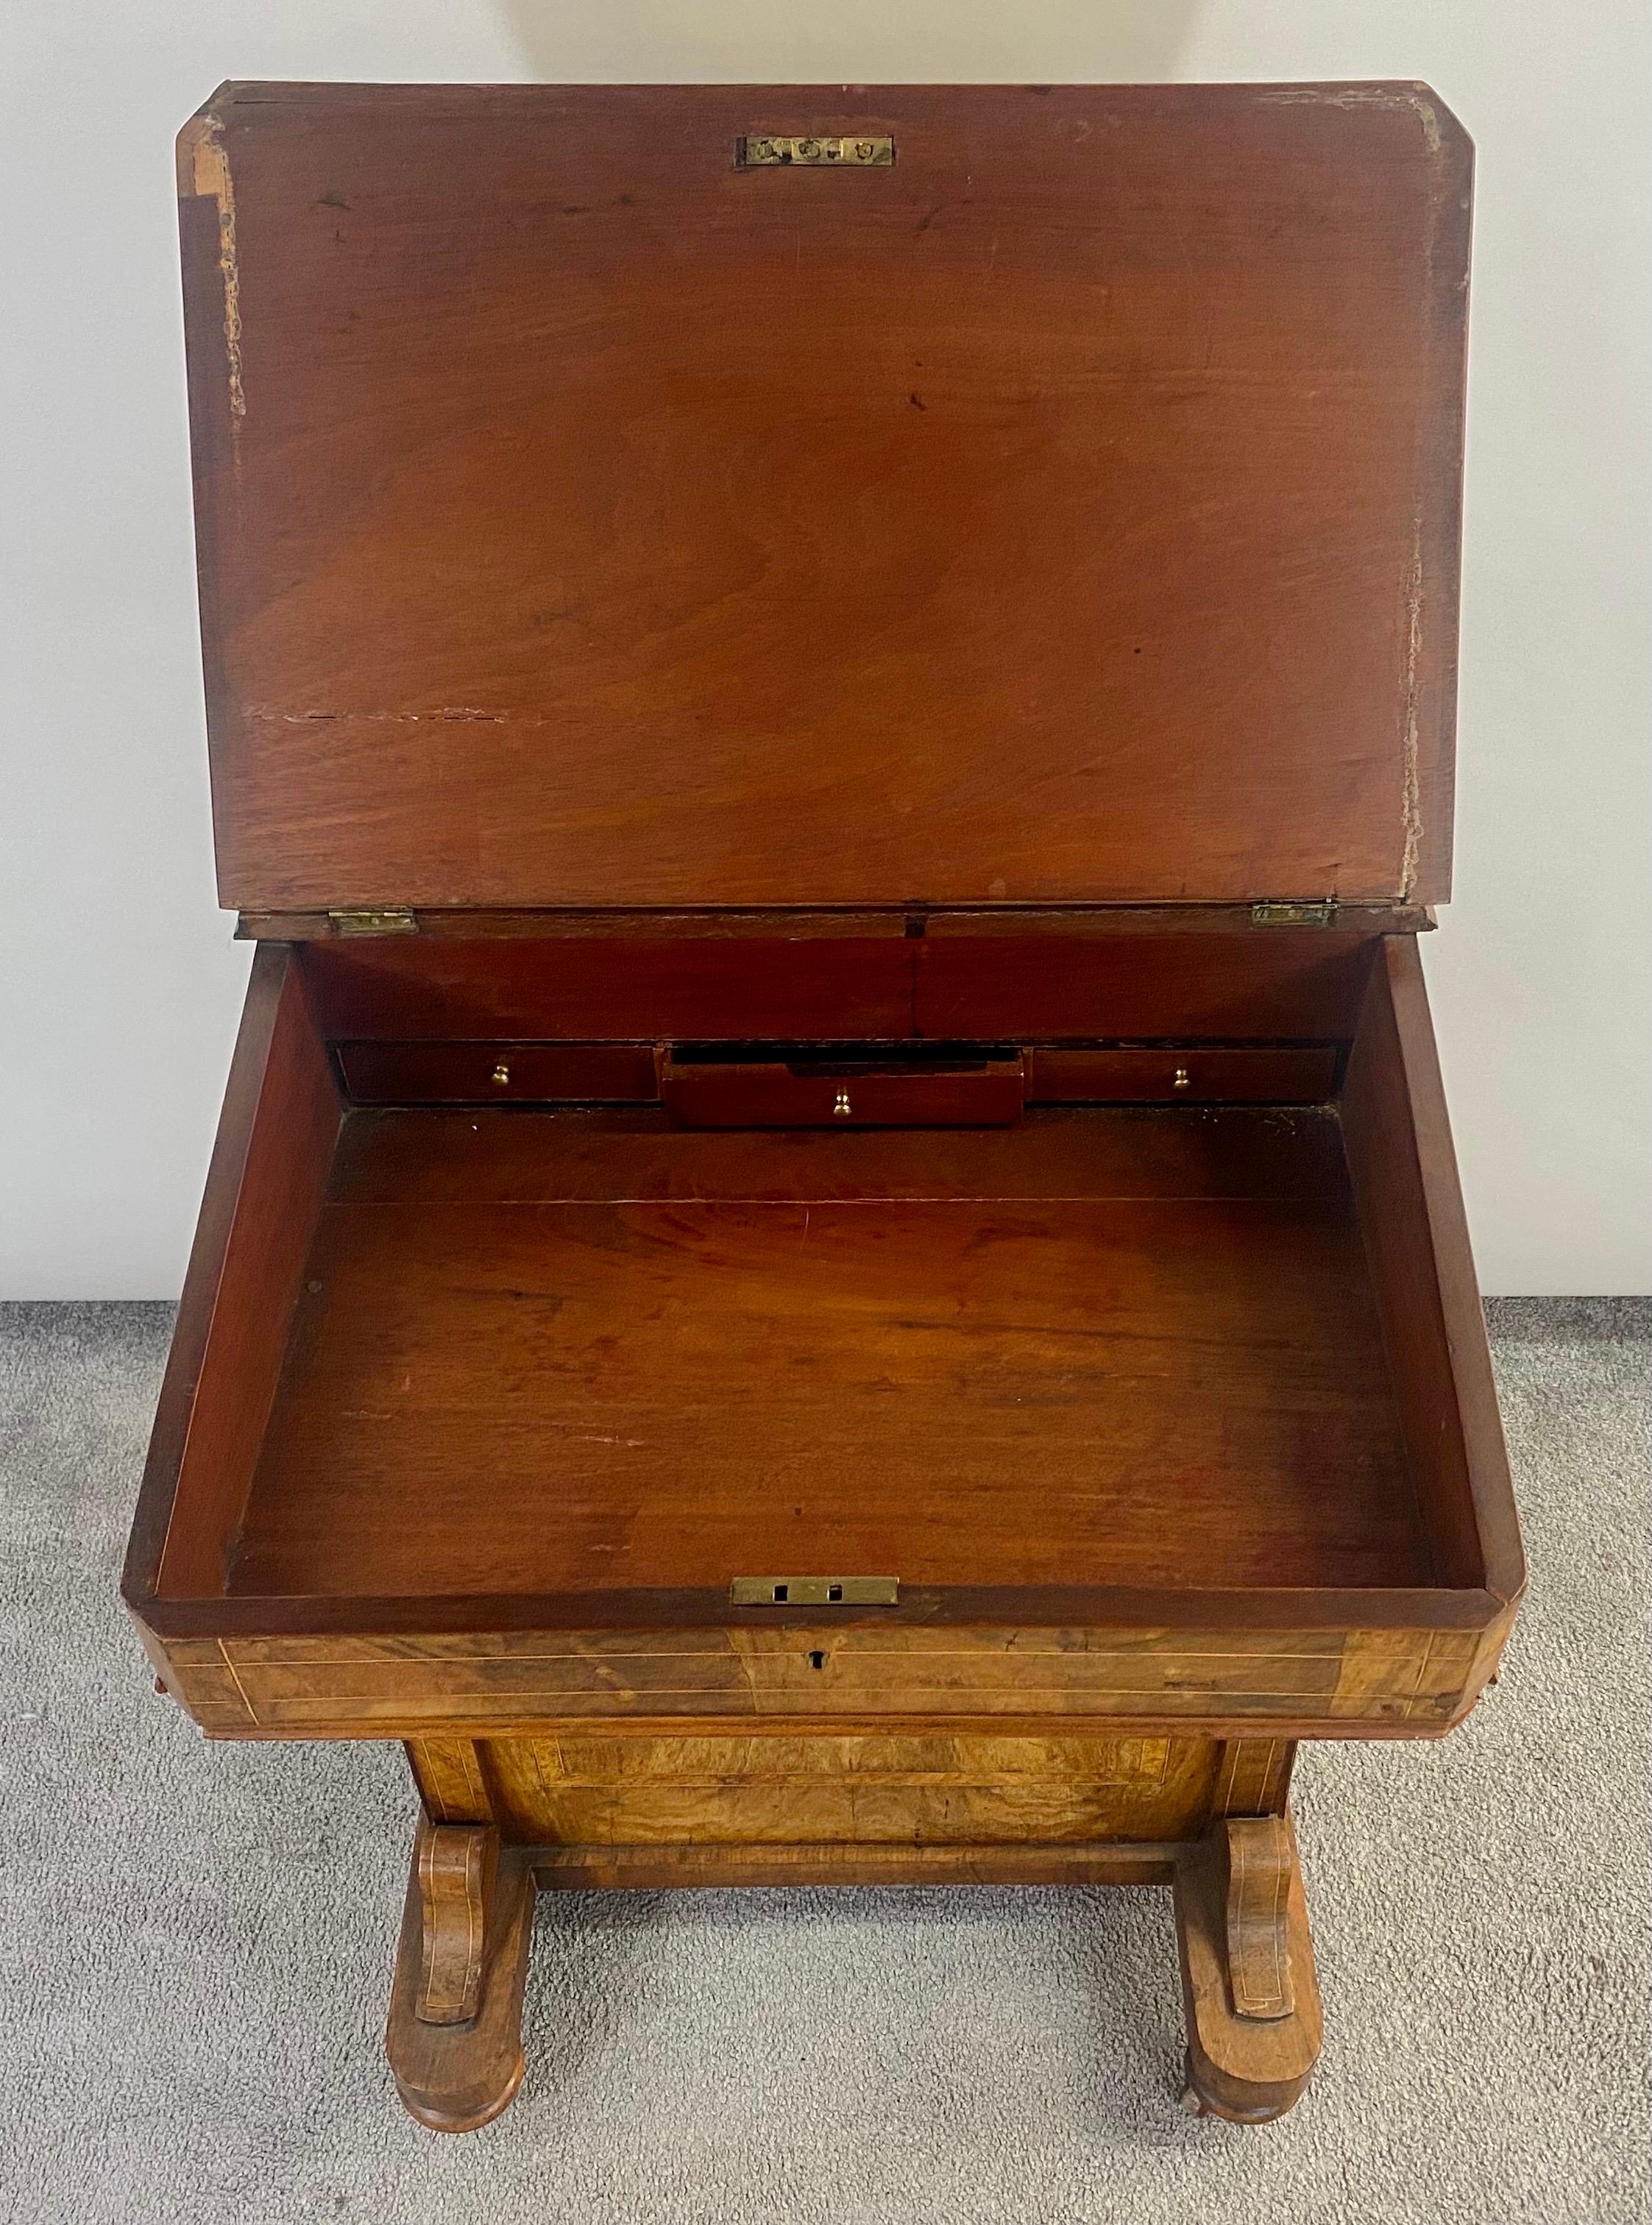 Victorian Davenport desk burl inlaid over four-side drawers. The desk features dummy drawers to one side and real working drawers to the other.
The leather top is in good condition and the fitted interior line provides room to organize your desk